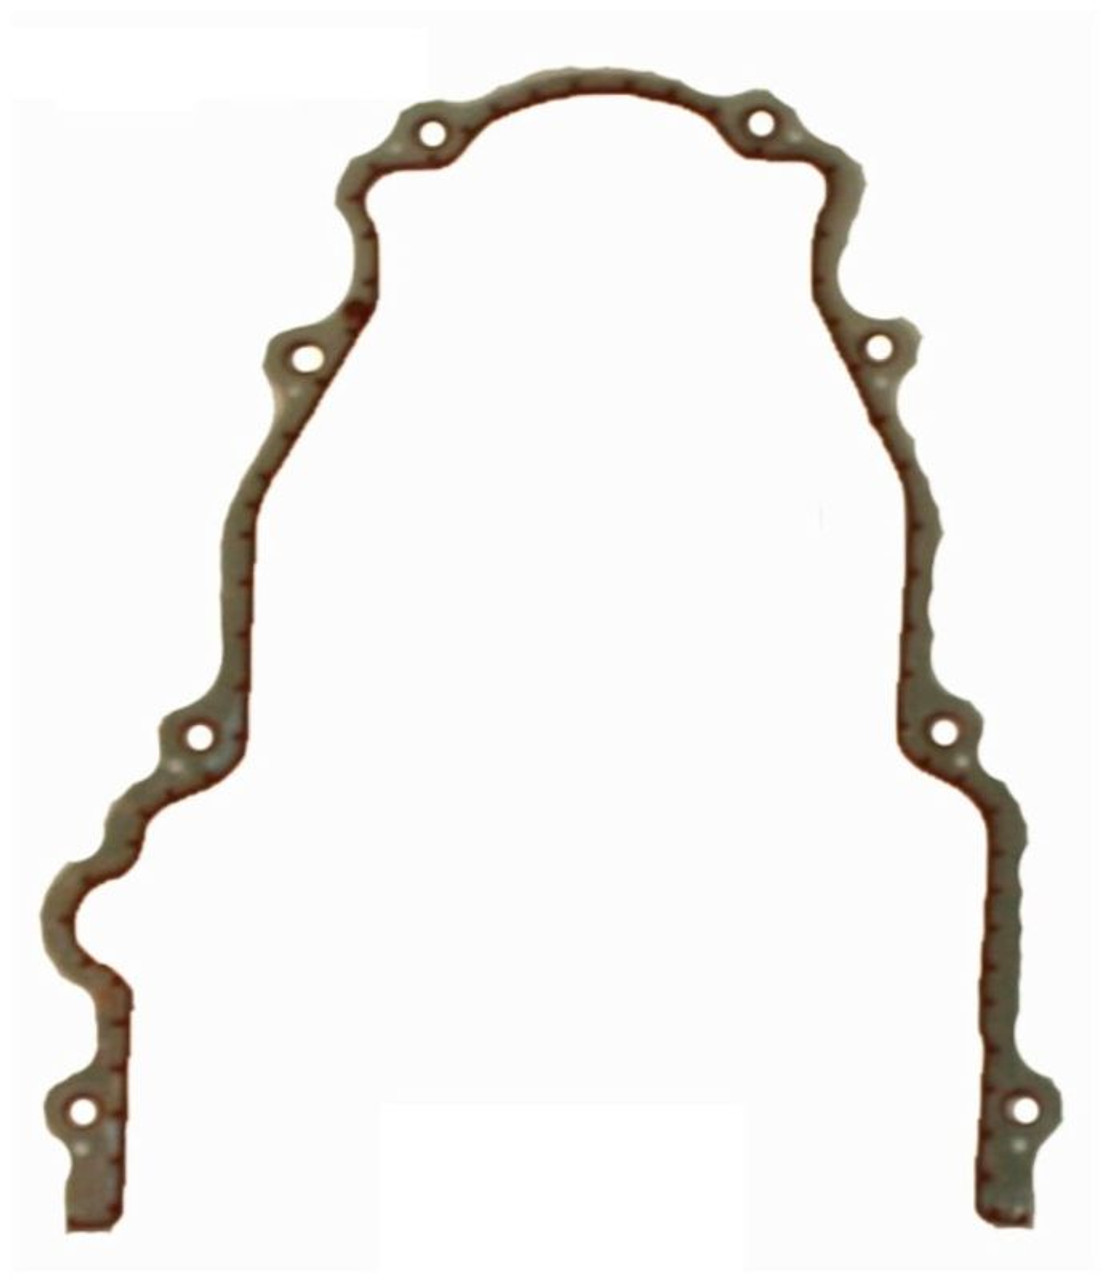 2006 Cadillac Escalade EXT 6.0L Engine Timing Cover Gasket TCG293-A -317